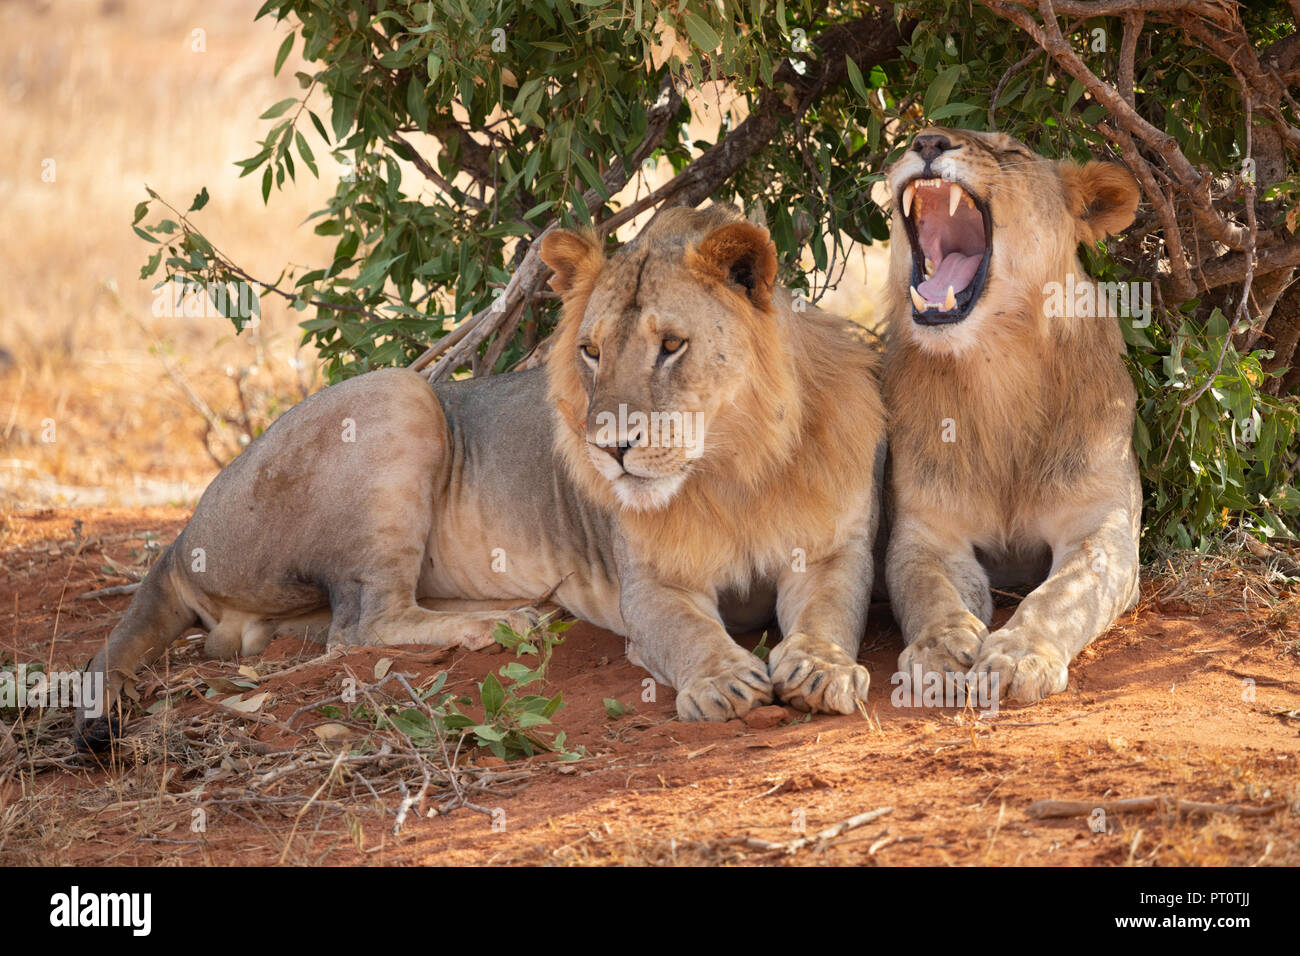 TSAVO EAST NATIONAL PARK, KENYA, AFRICA - FEBRUARY 25th 2018: Tsavo lions resting under the shade of a bush in the evening Stock Photo